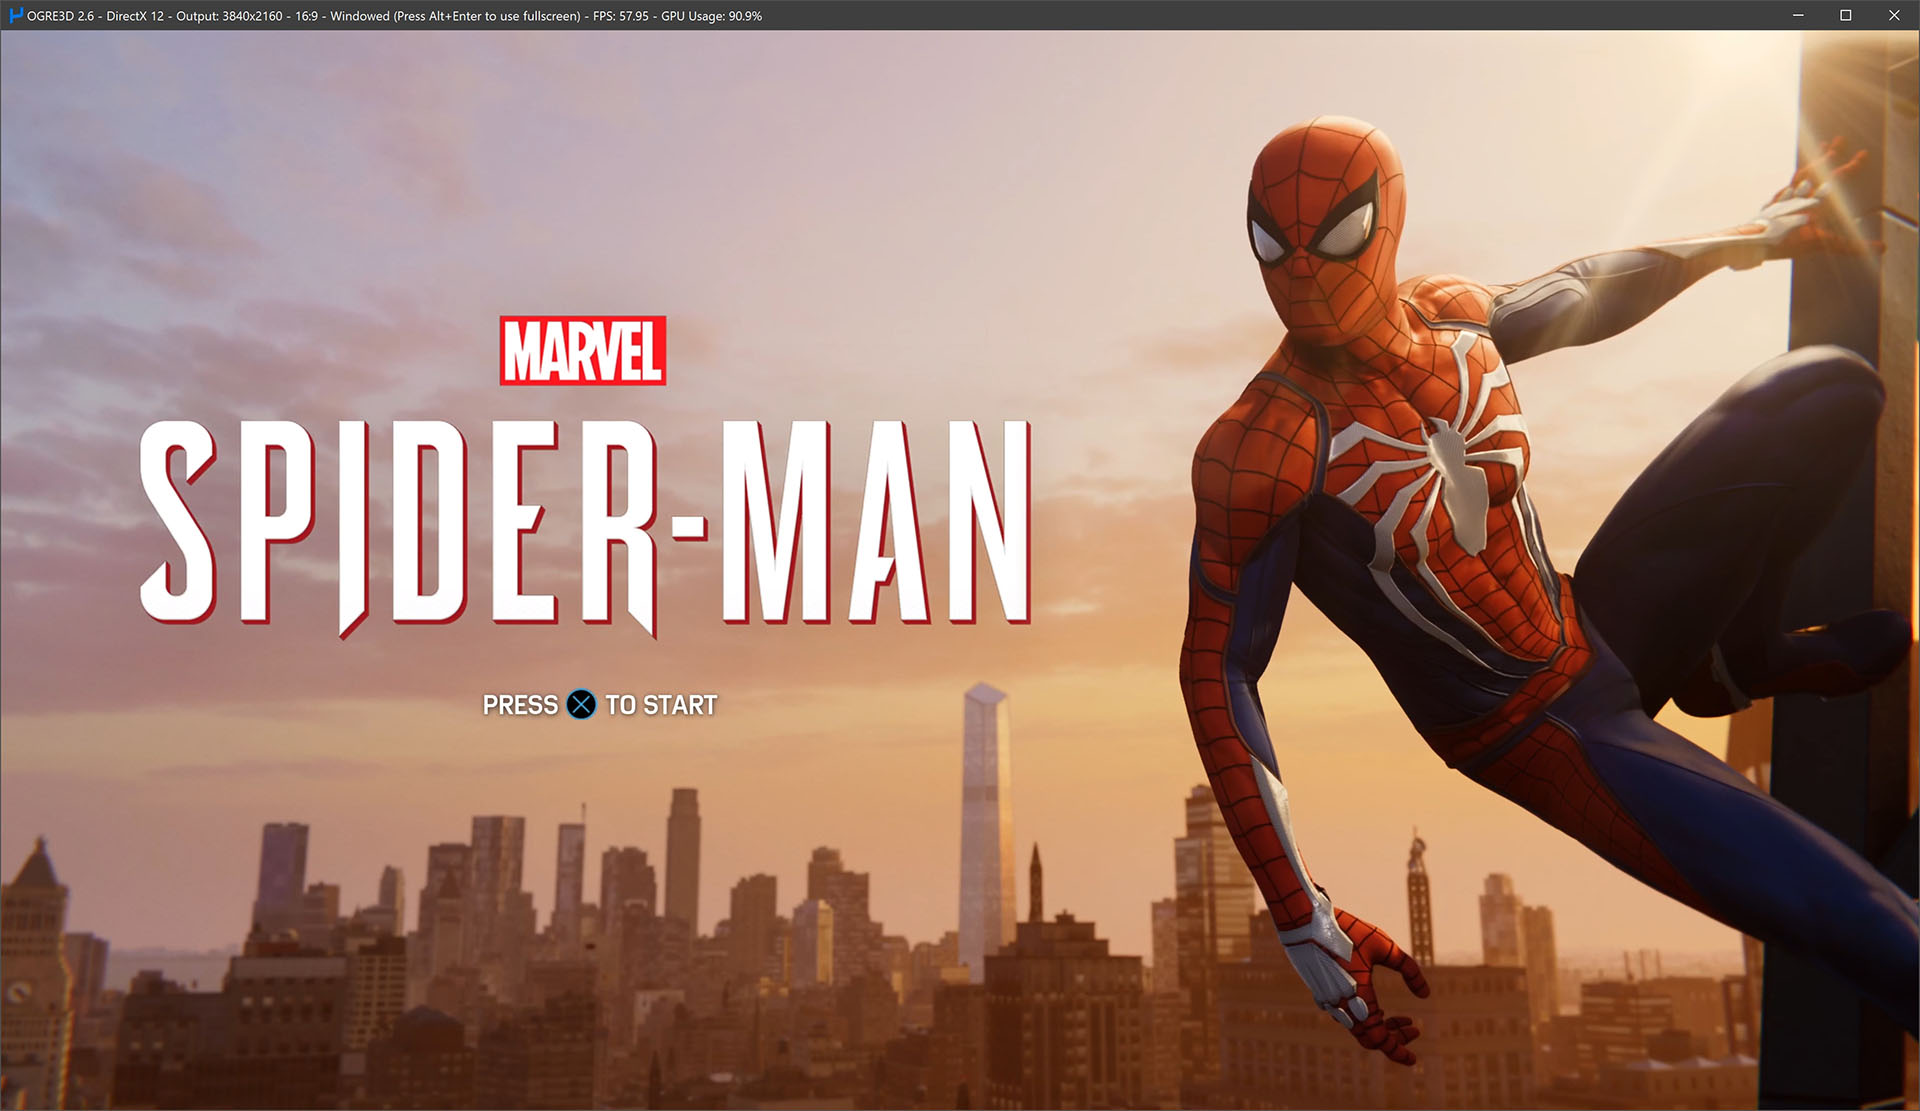 Cover Image for Spider-Man (2018) runs on PC with PS4 Emulator